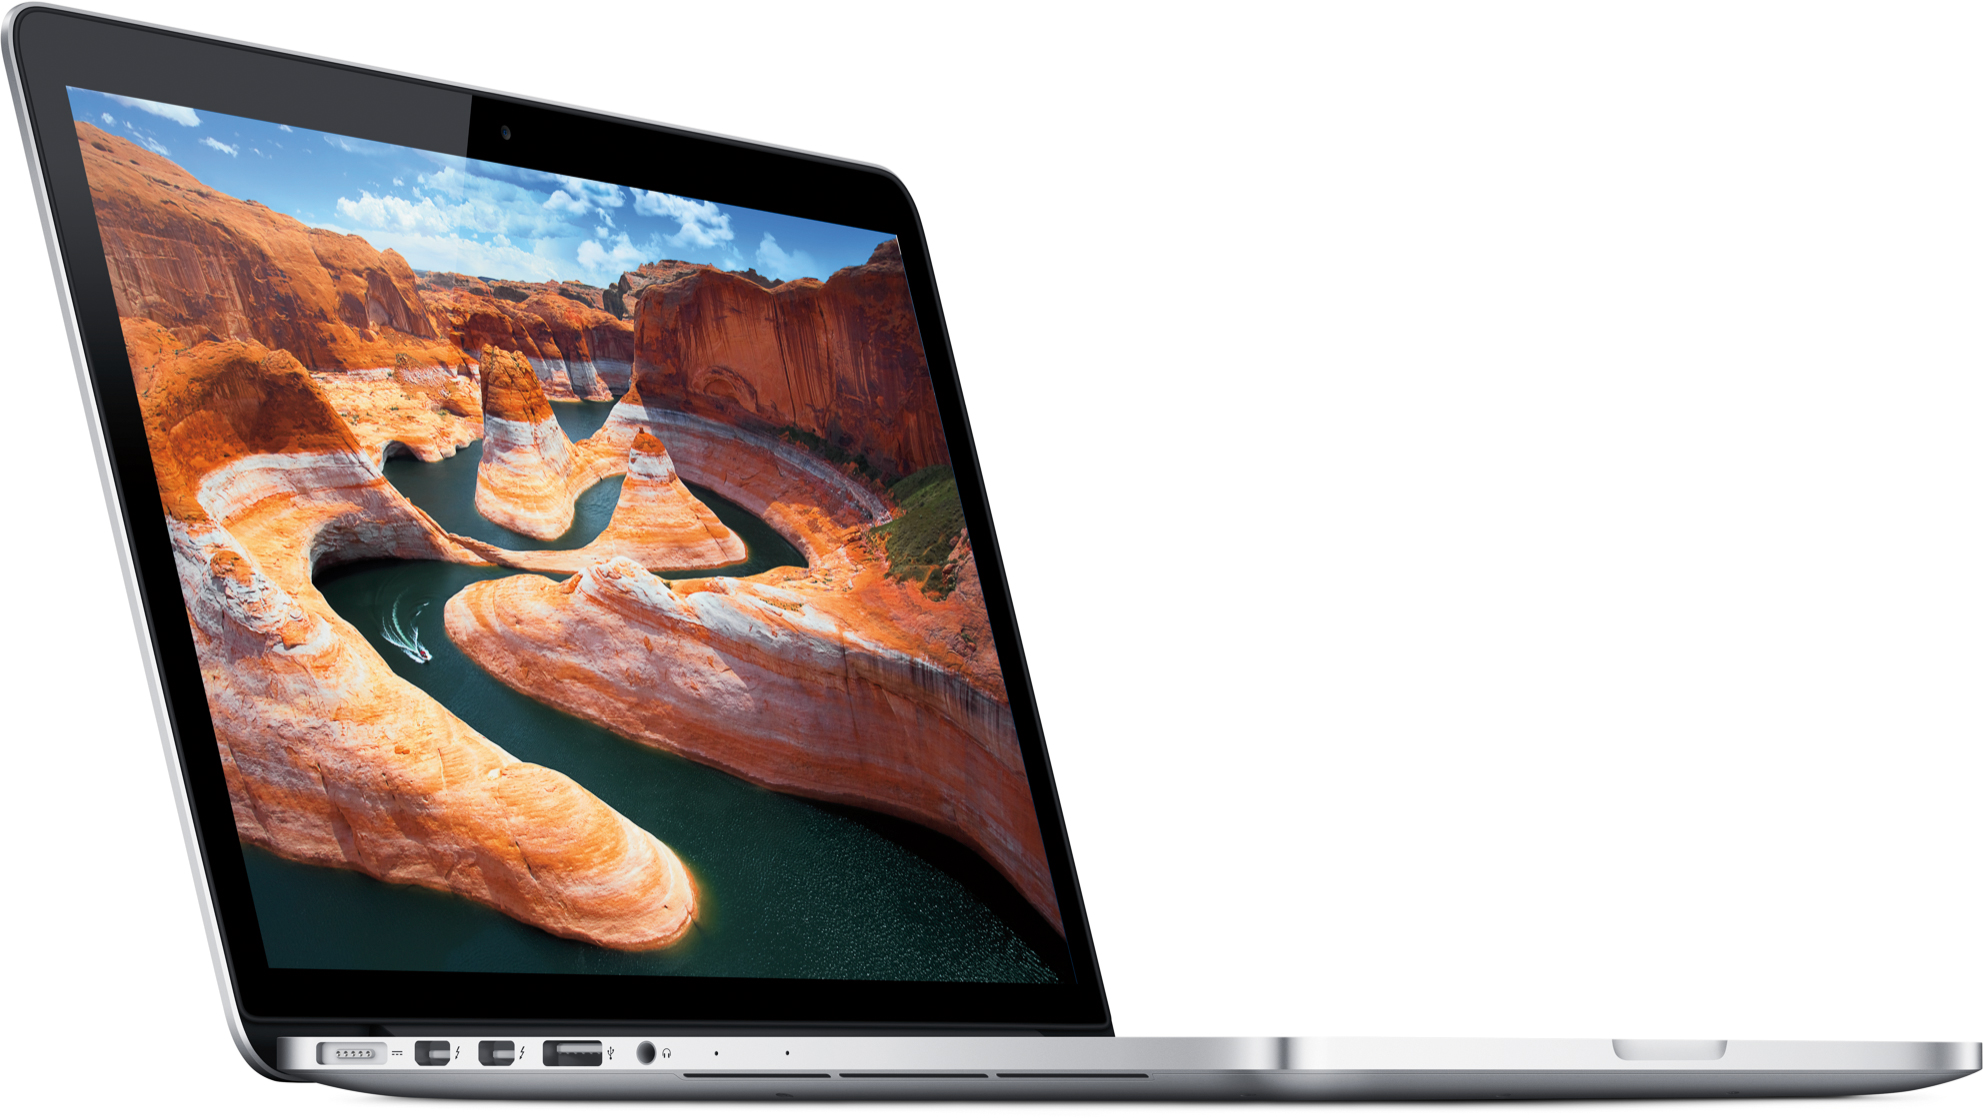 ↪ MacBook Pro with 13-inch Retina display is the new choice for PCMag.com editors